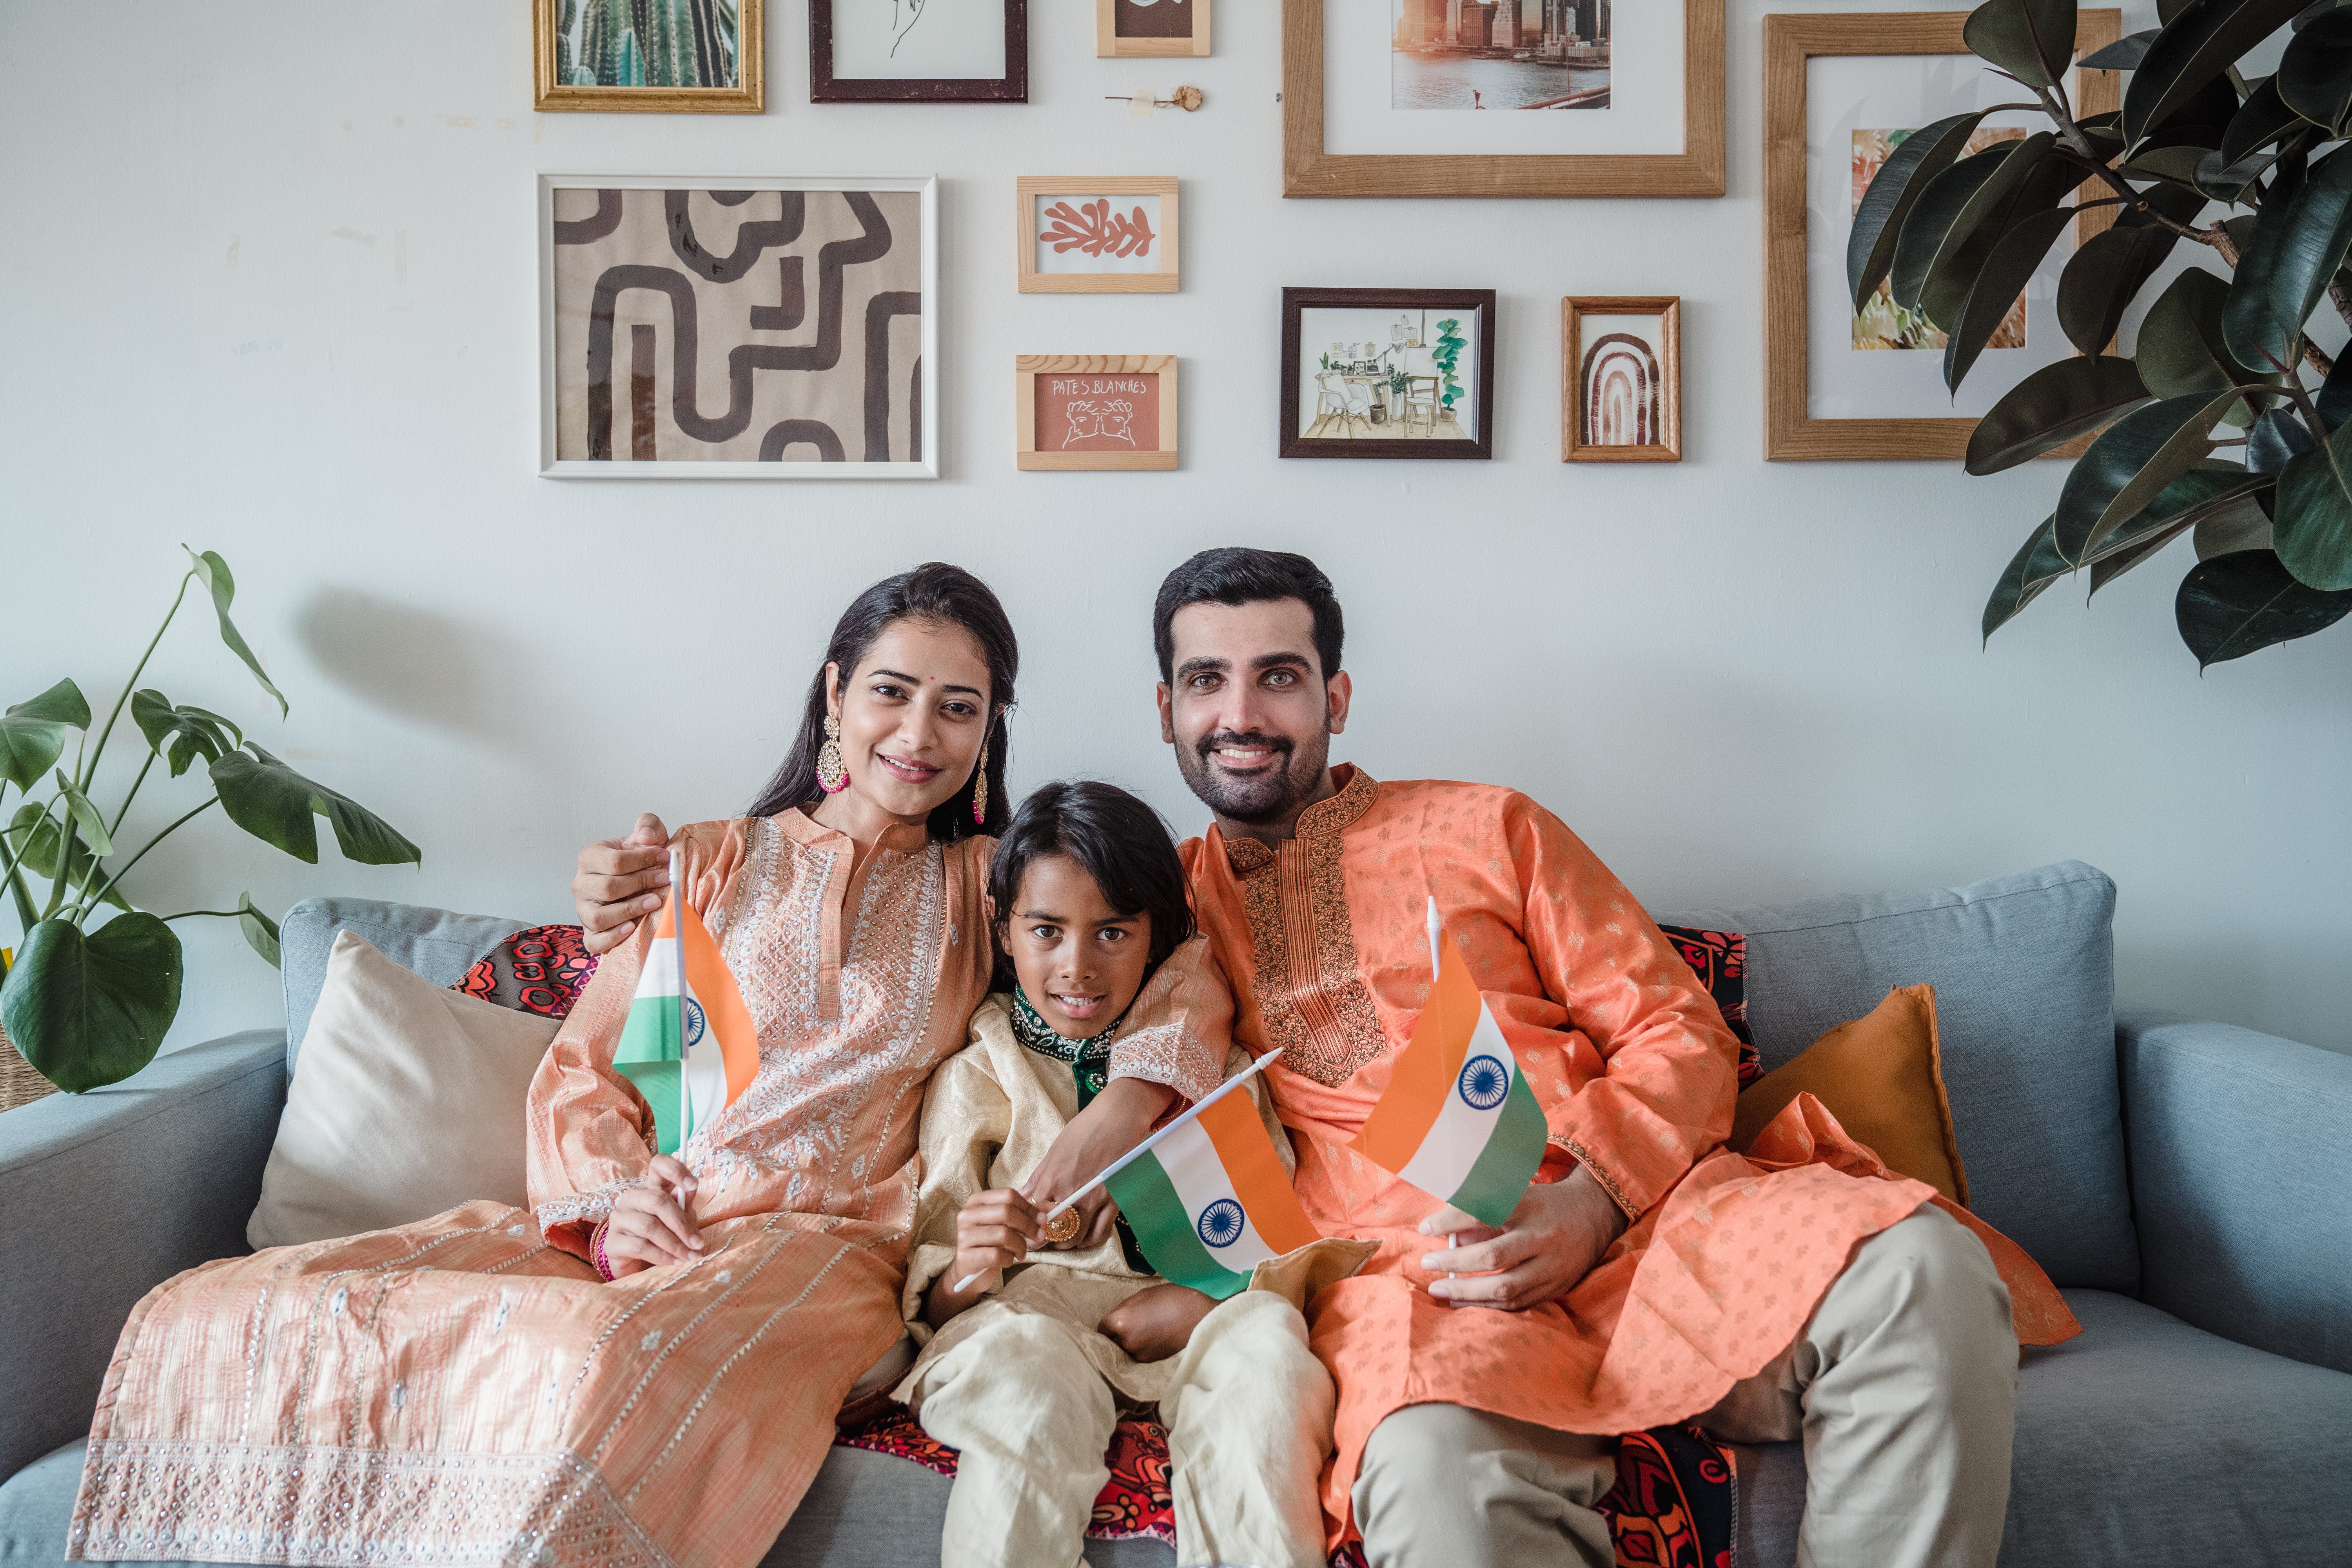 A happy family of three sitting on a couch holding their country's flag | Source: Pexels